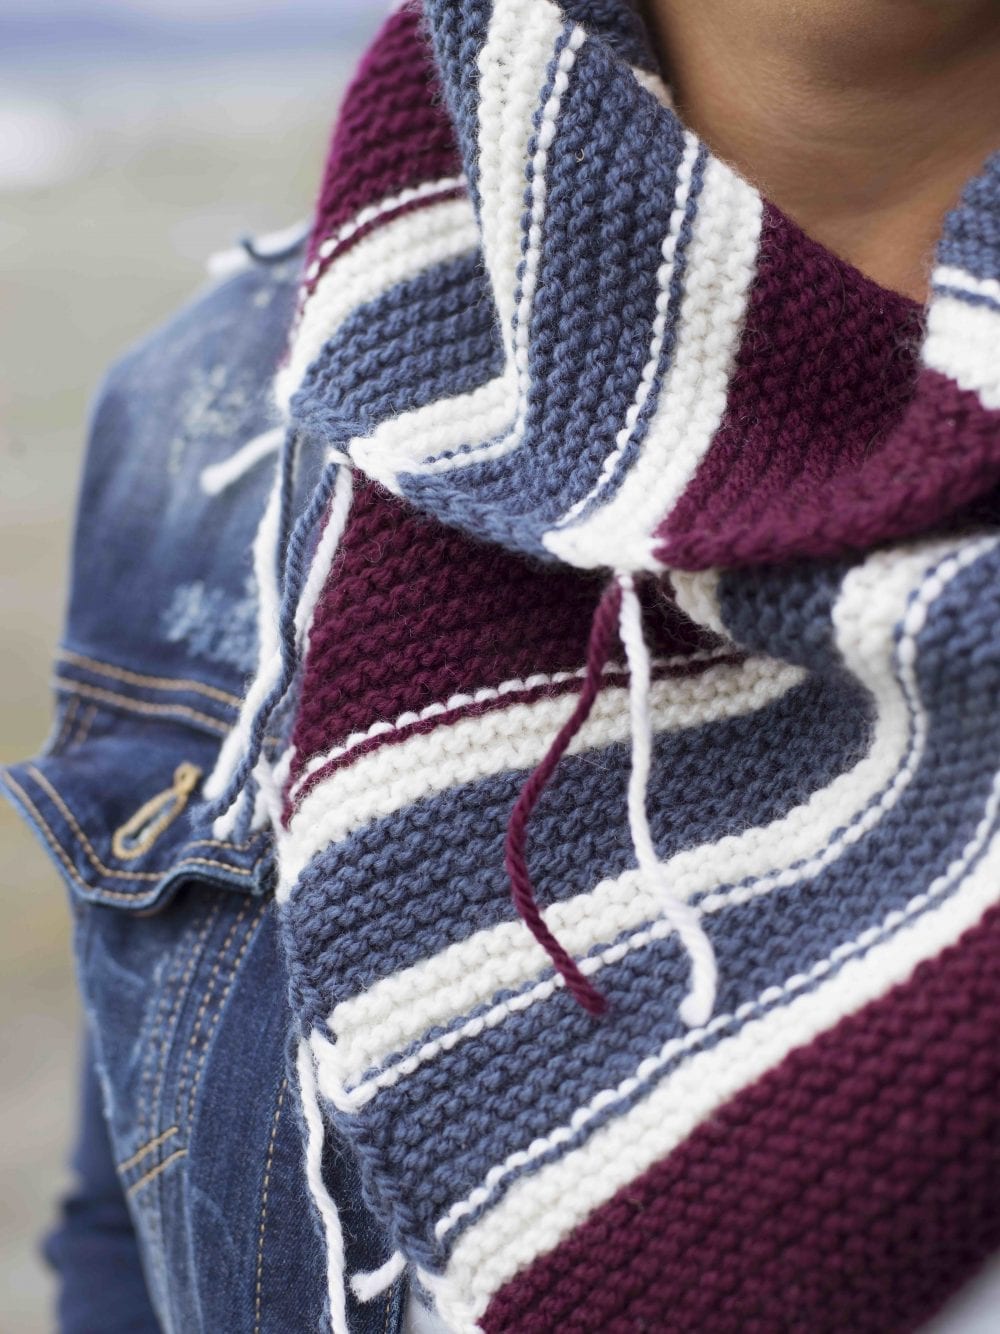 Scraggle scarf free knitting pattern for beginners